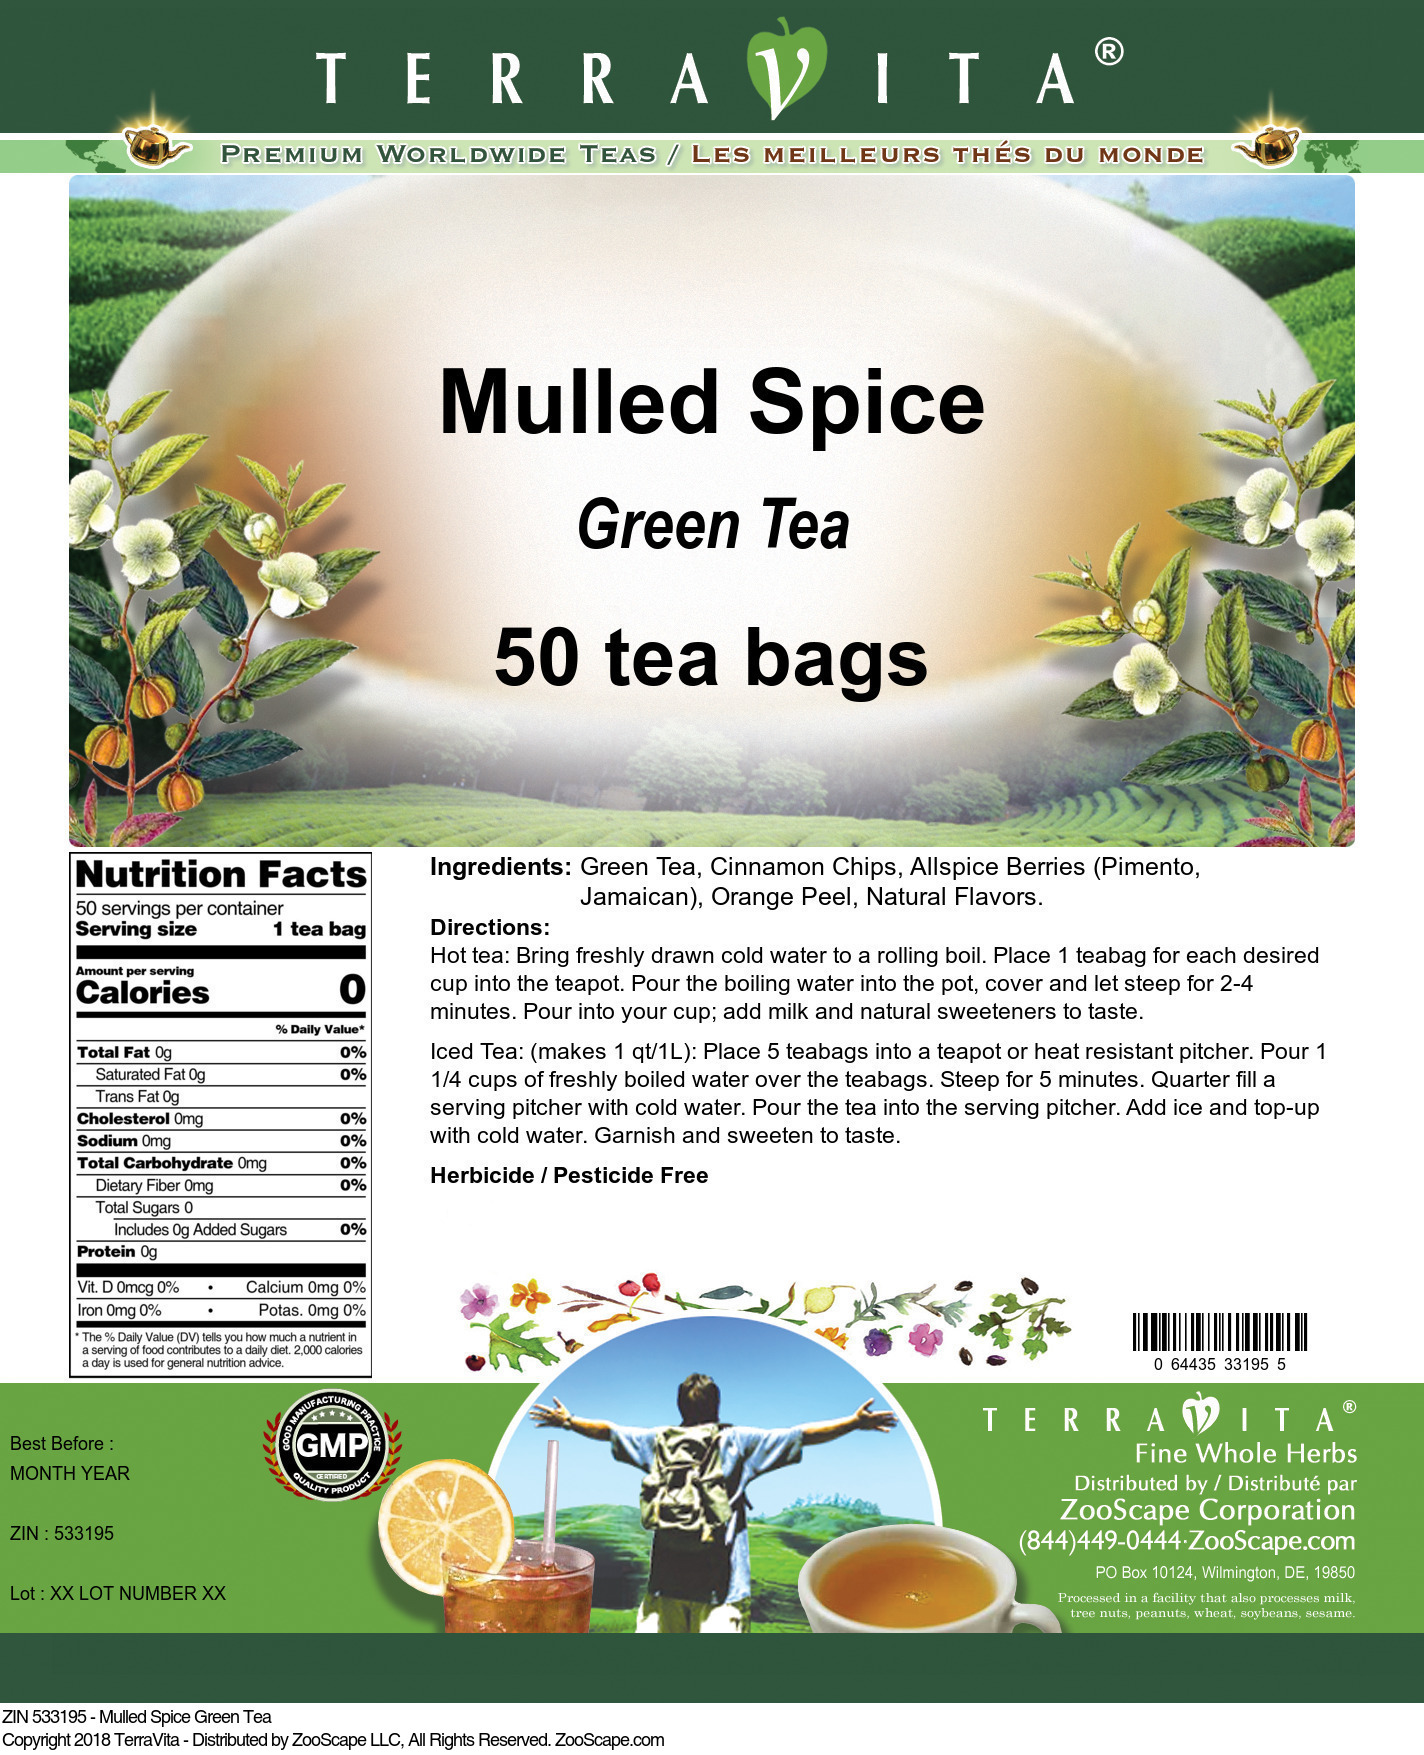 Mulled Spice Green Tea - Label